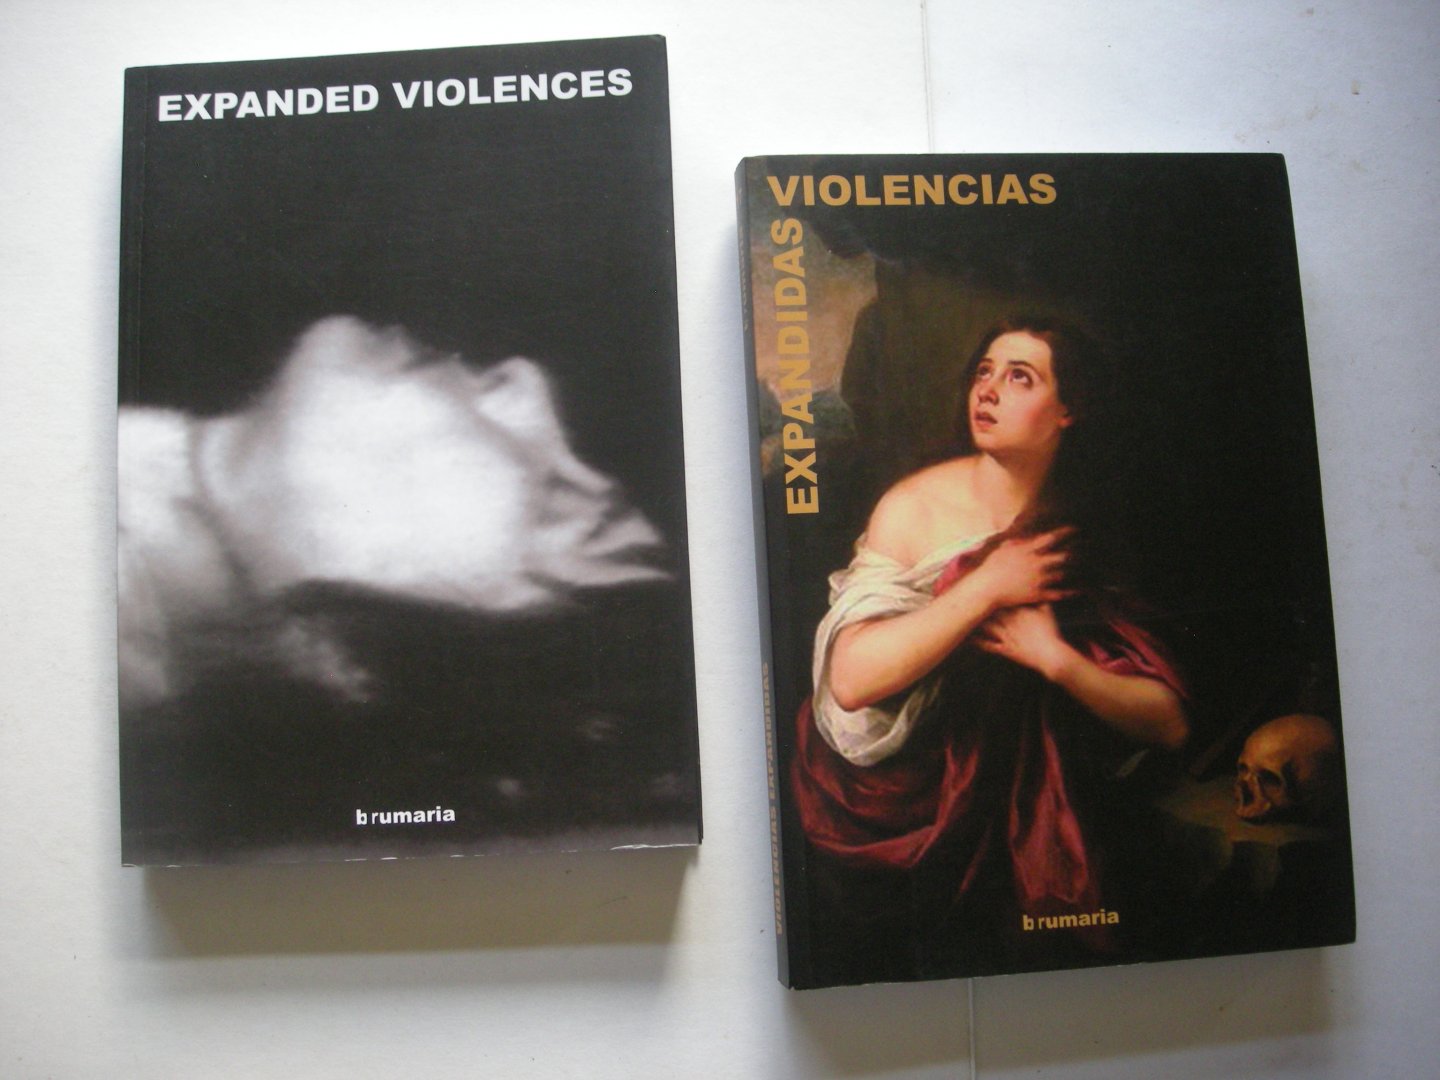 Corbeira, Dario, editor - Expanded violences (collection of articles by e.g. Homerus / Einstein / Chomsky etc. on 'Is Violence the only means to change this deadly World?')